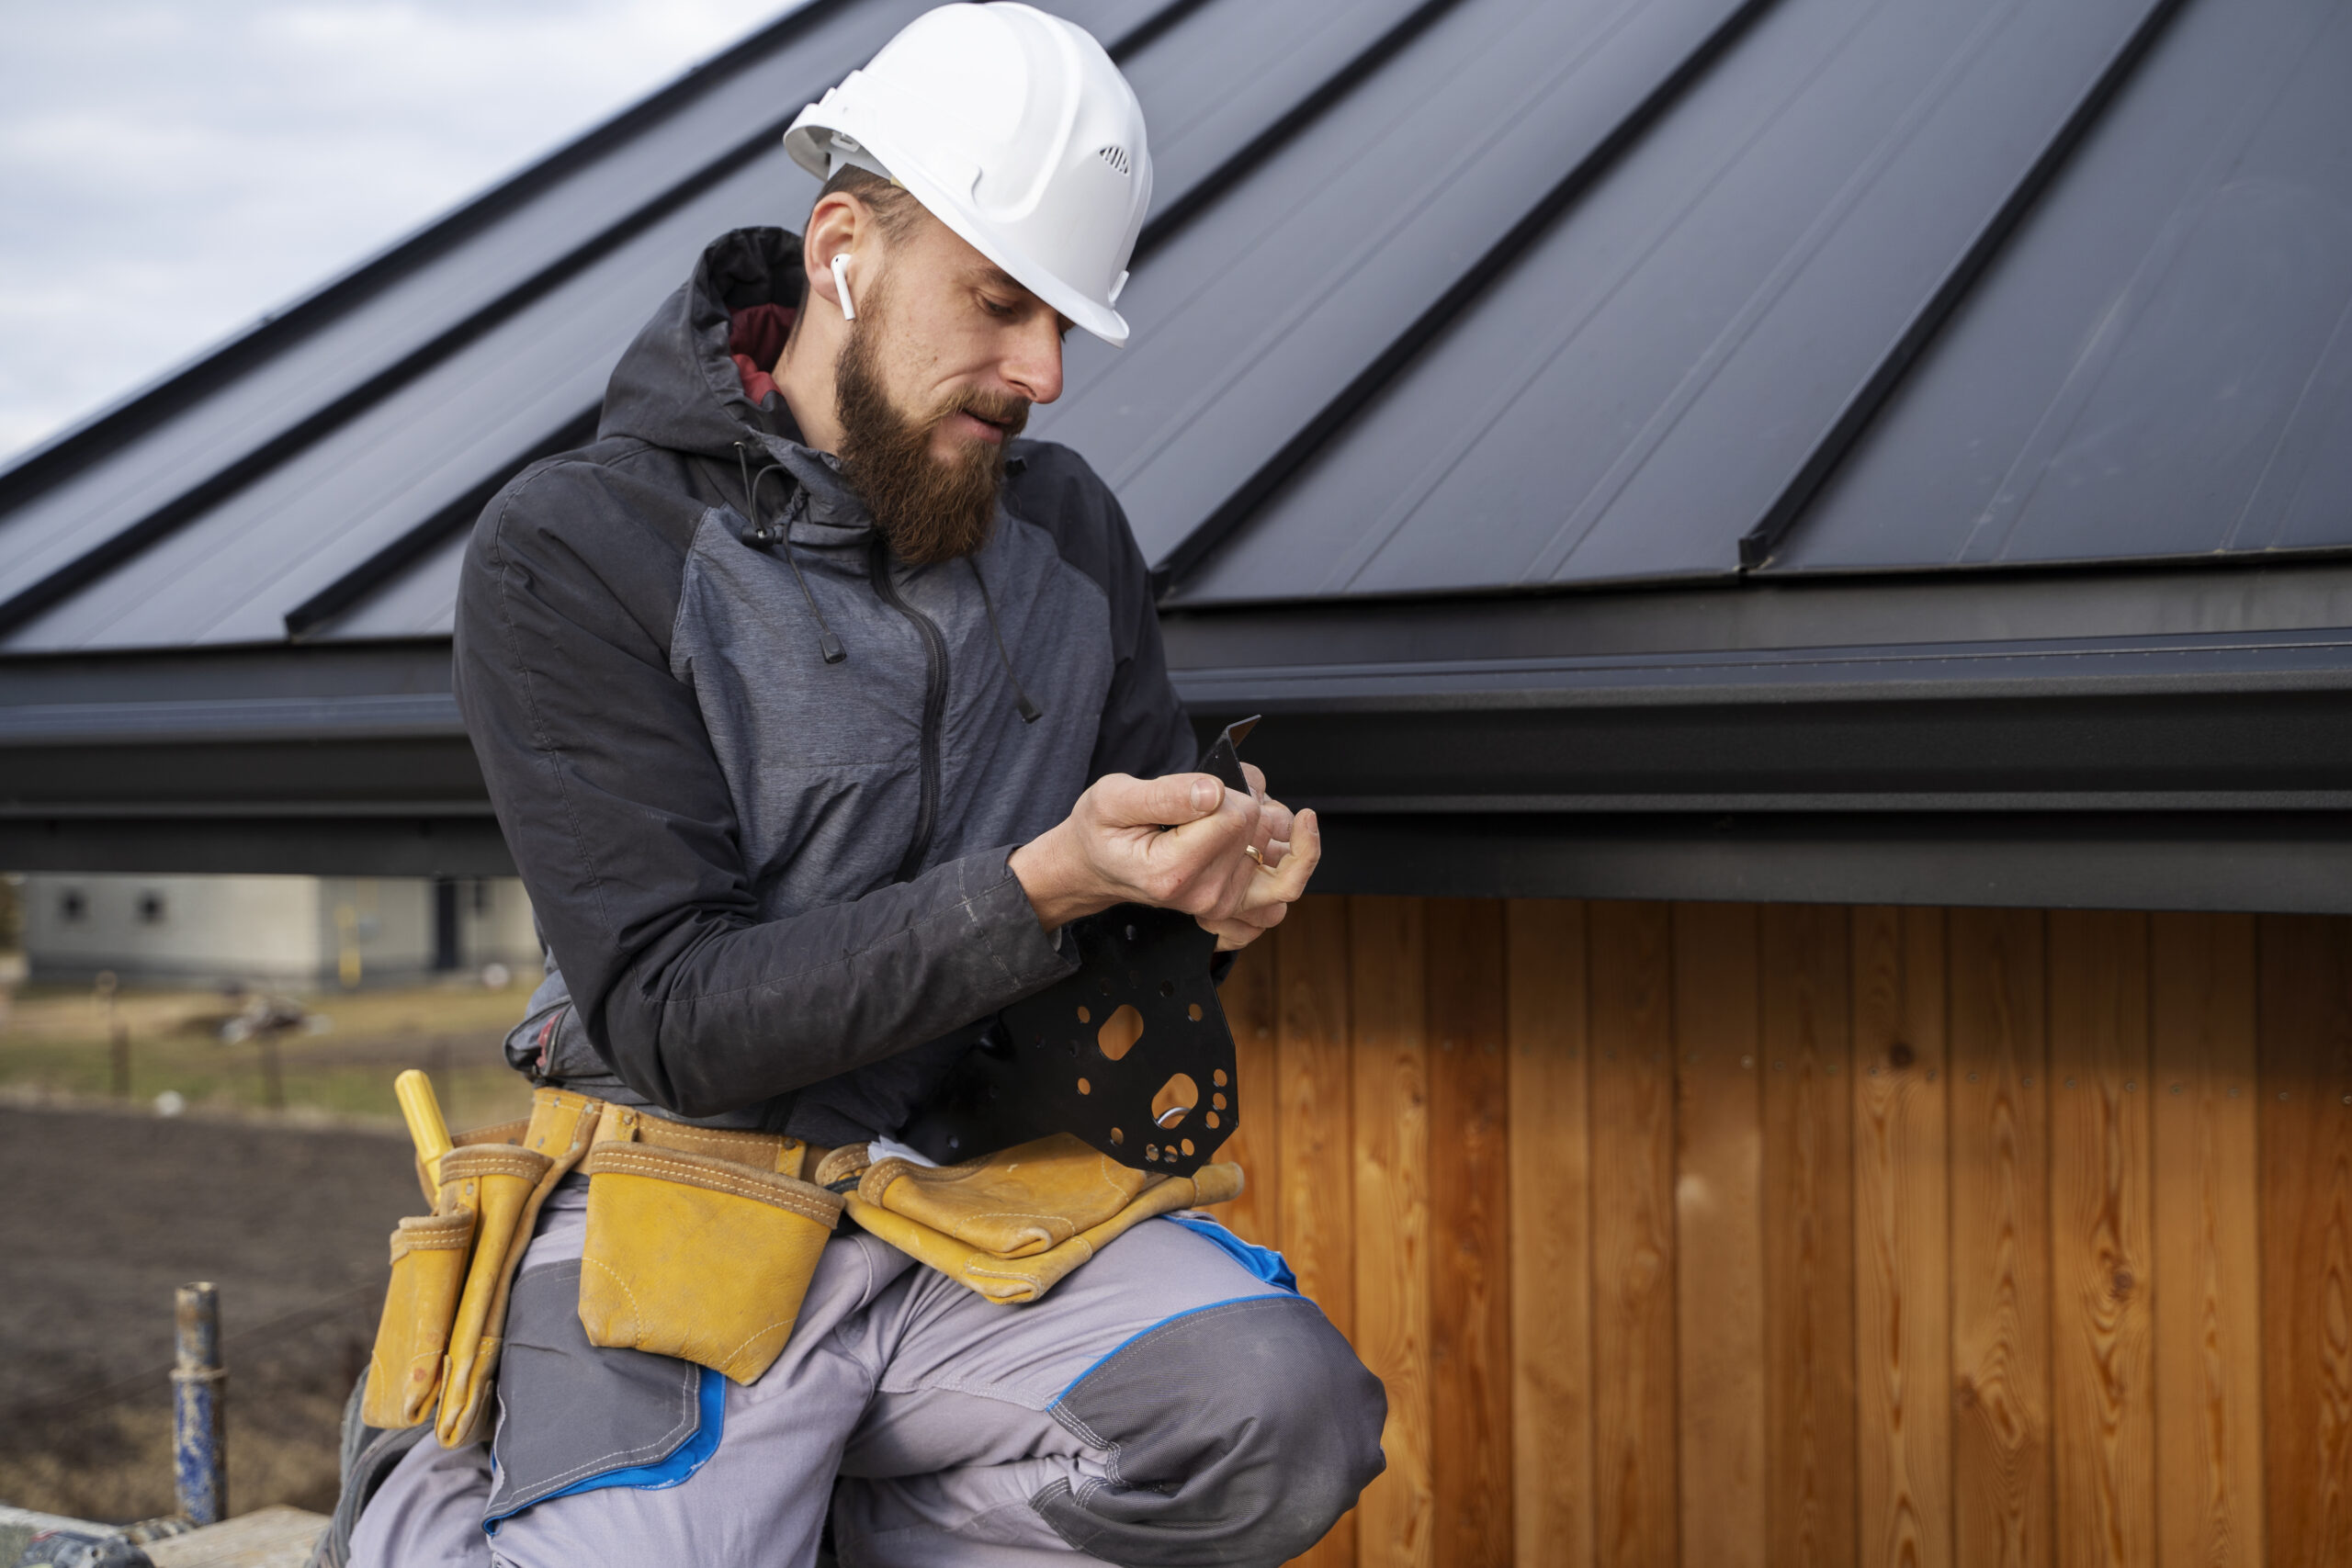 Construction worker with a beard, wearing a white helmet and earbuds, inspecting a small metal object in his hands while sitting on a scaffolding, with a new metal roof and wooden siding in the background.